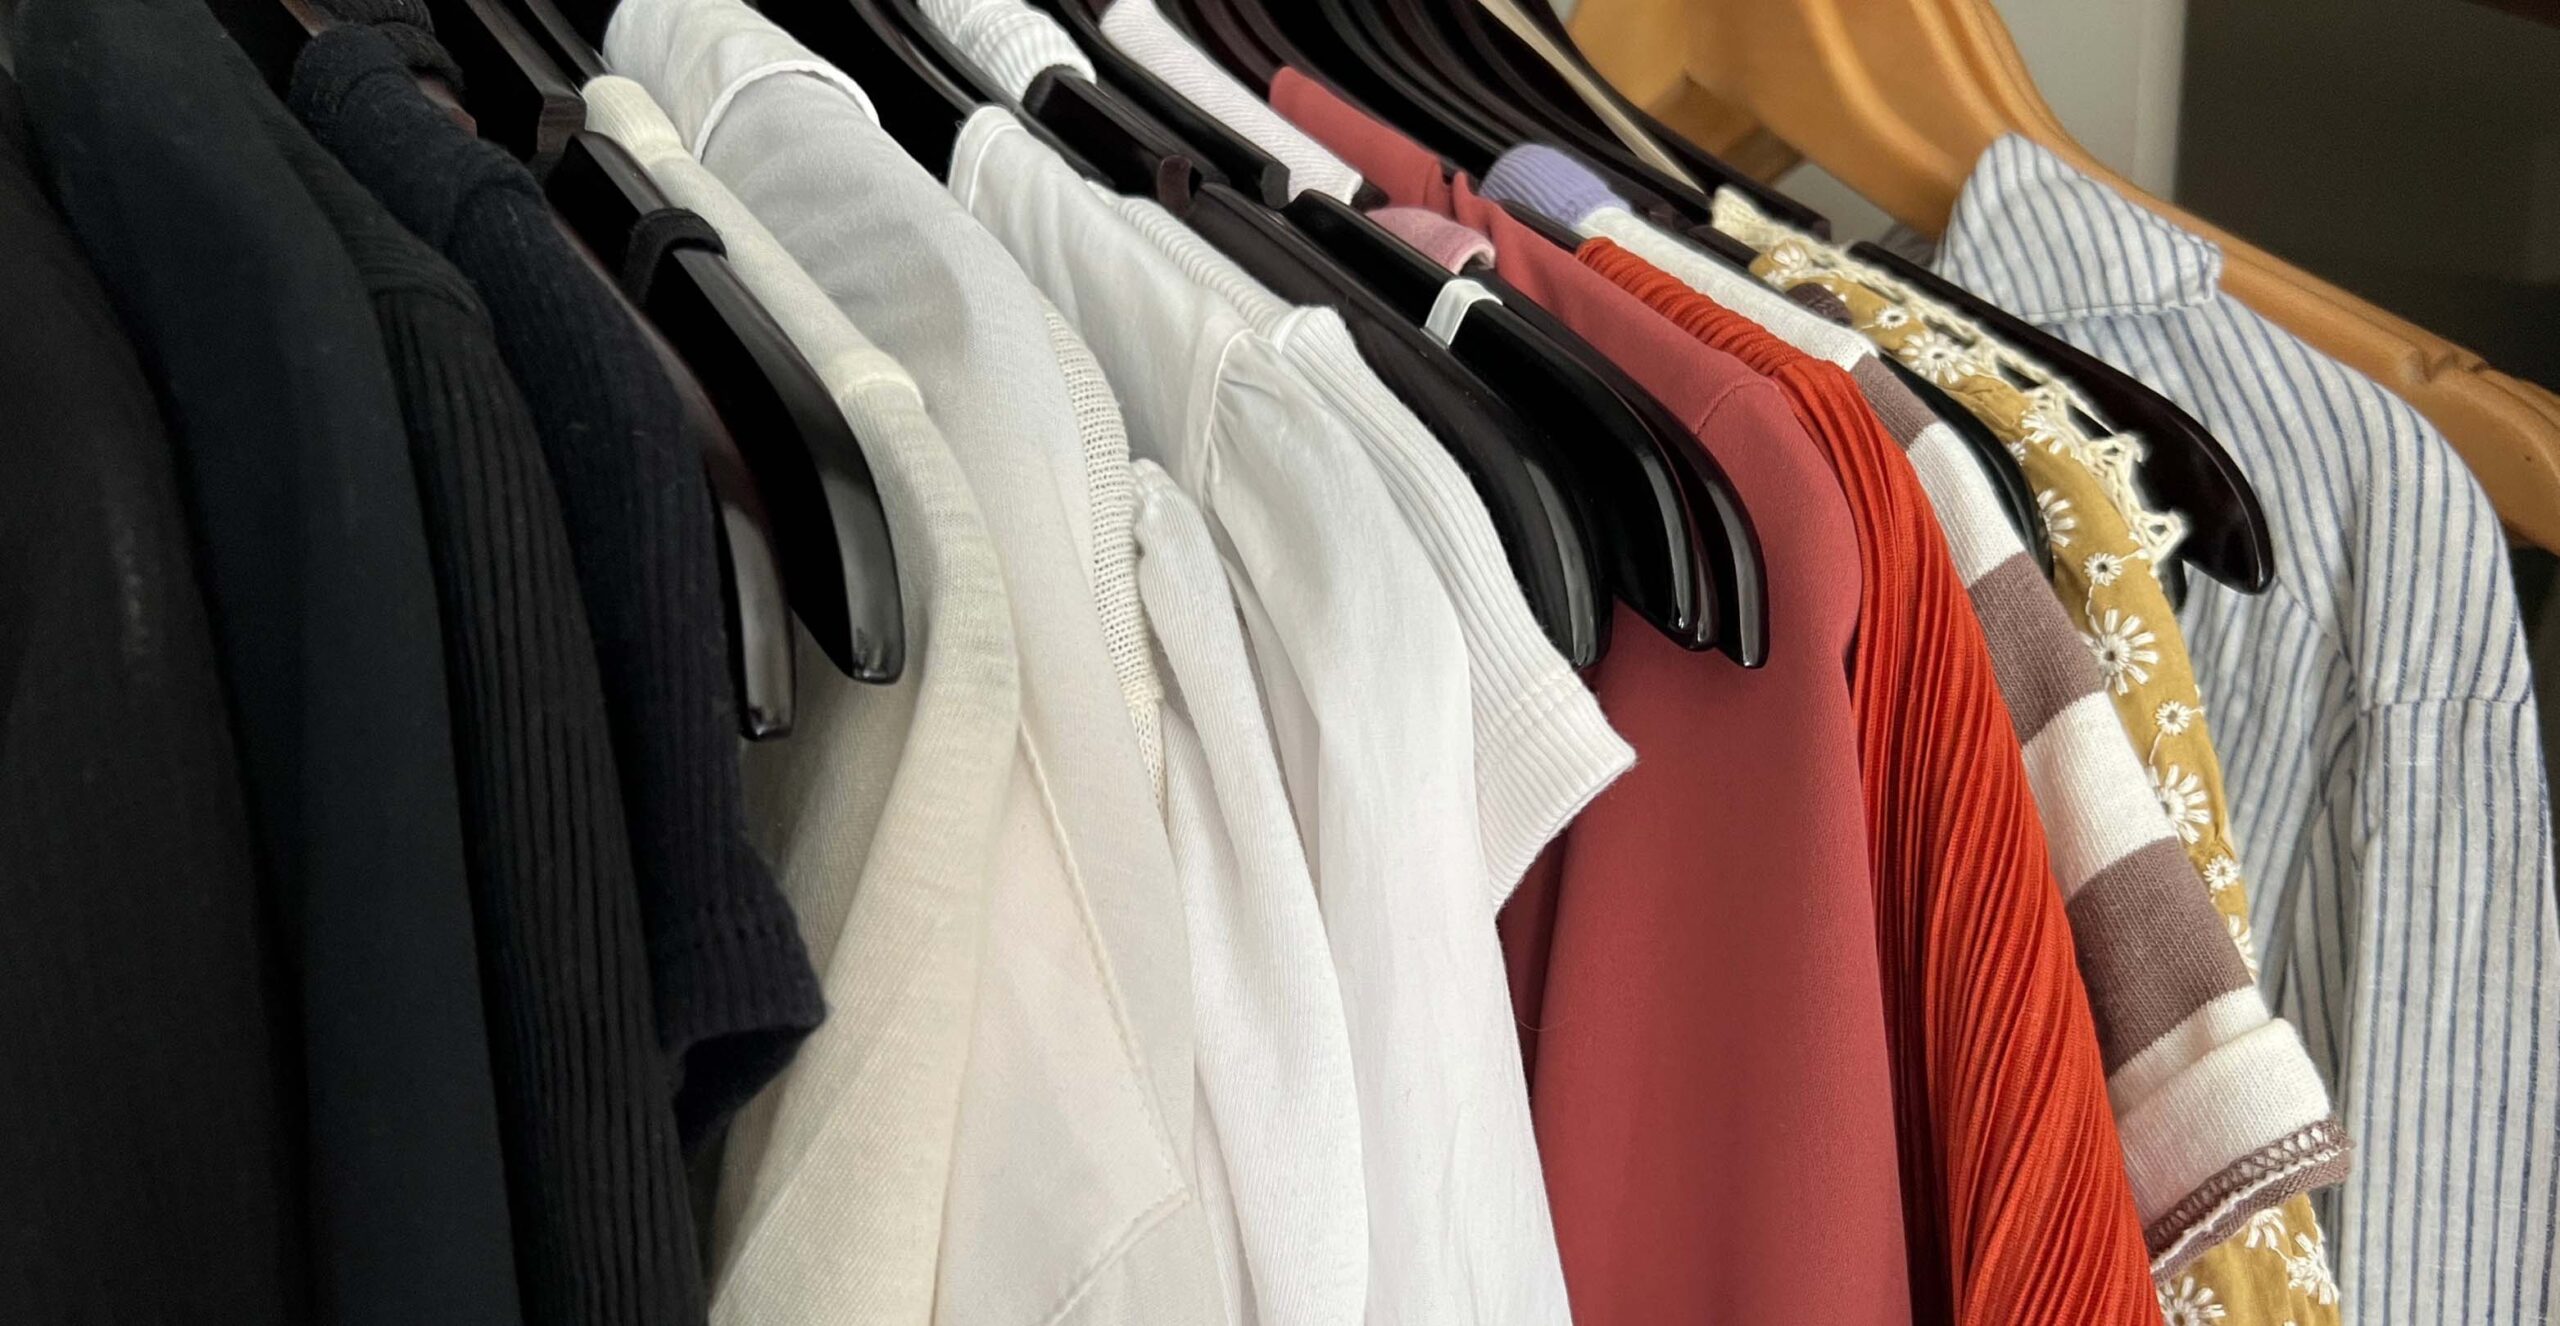 A close up photo of clothes hanging in a closet